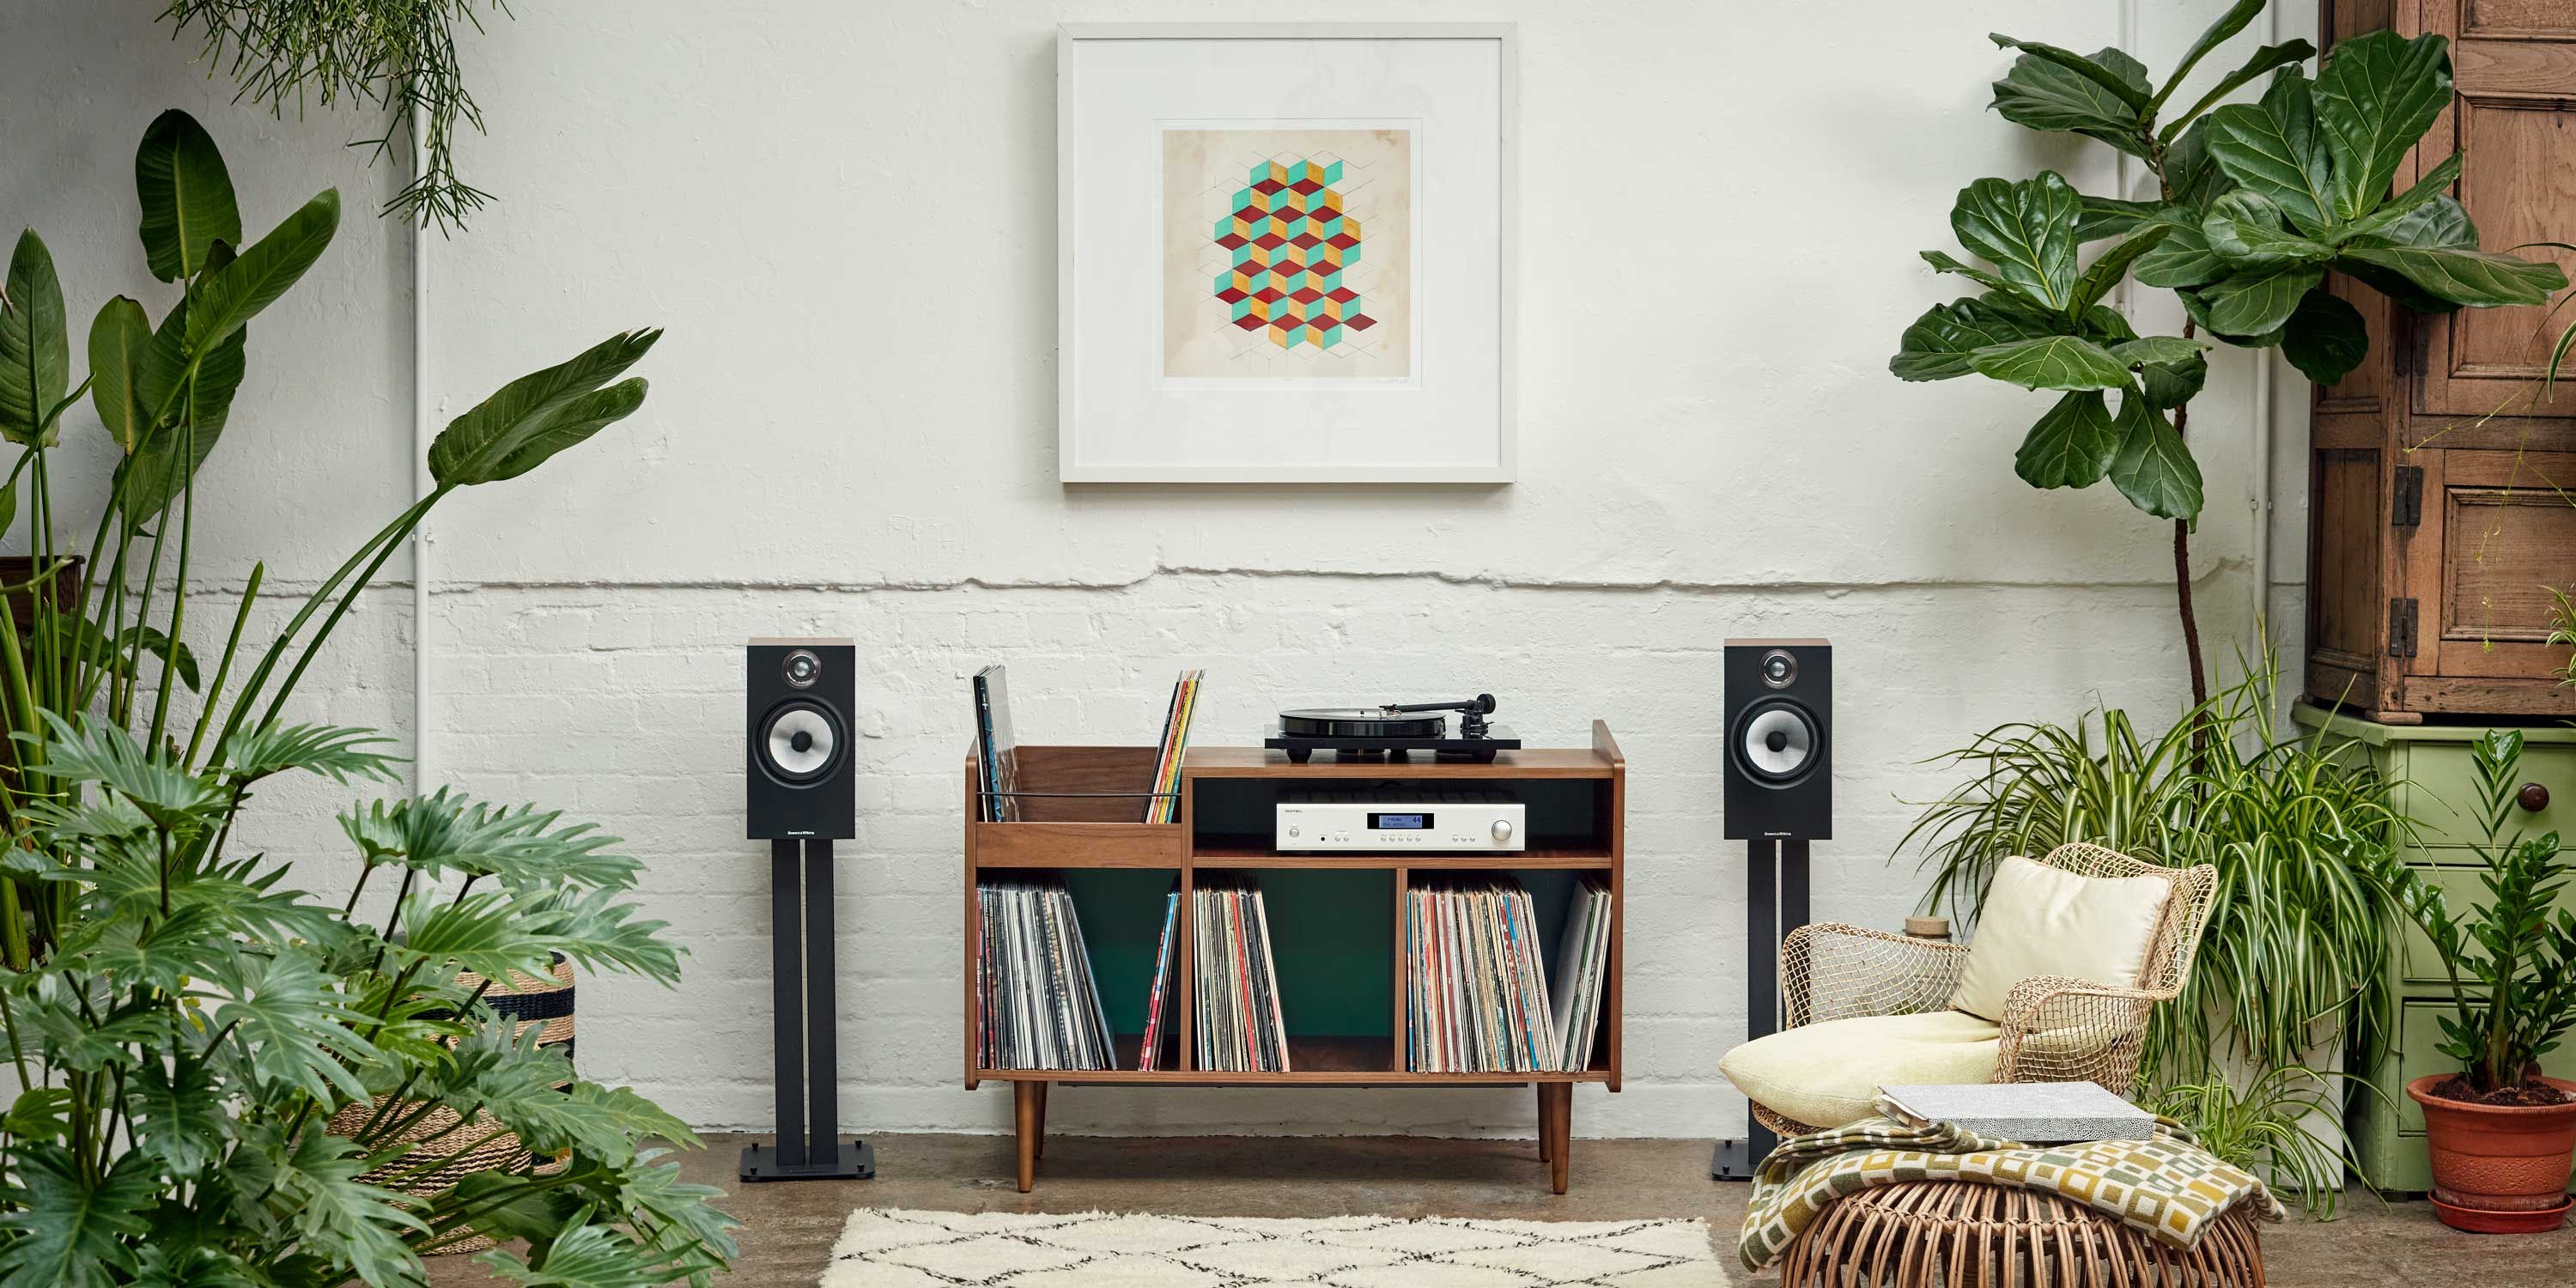 Bowers and wilkins listening room with plants